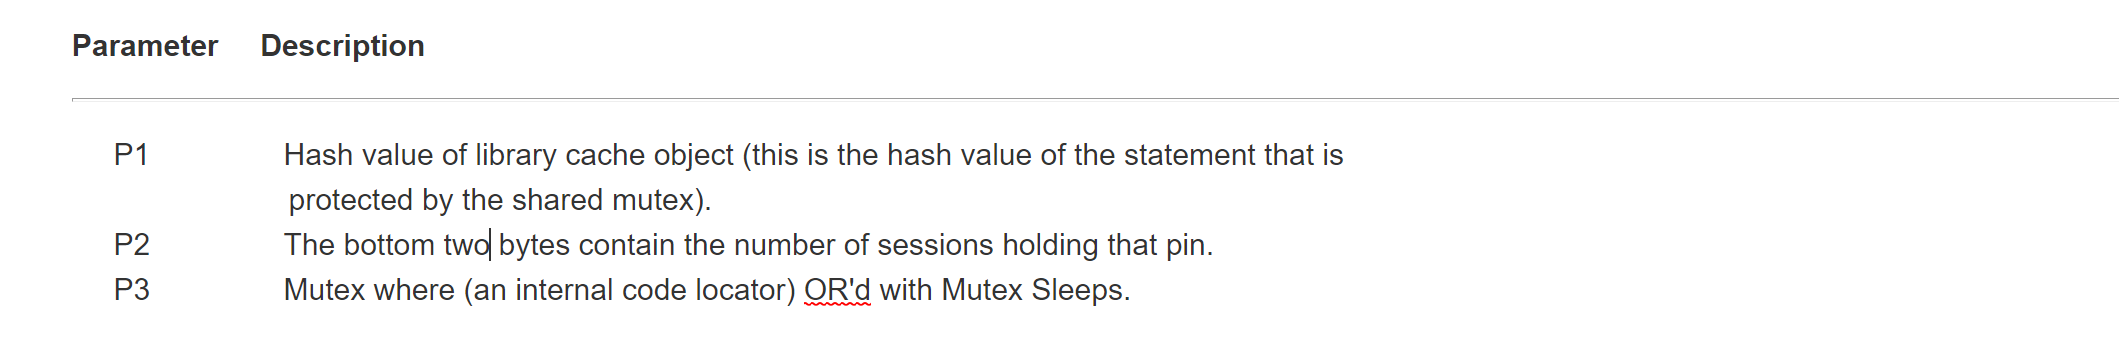 Information identifying why sessions are competing to update a shared mutex pin - cursor: pin S.